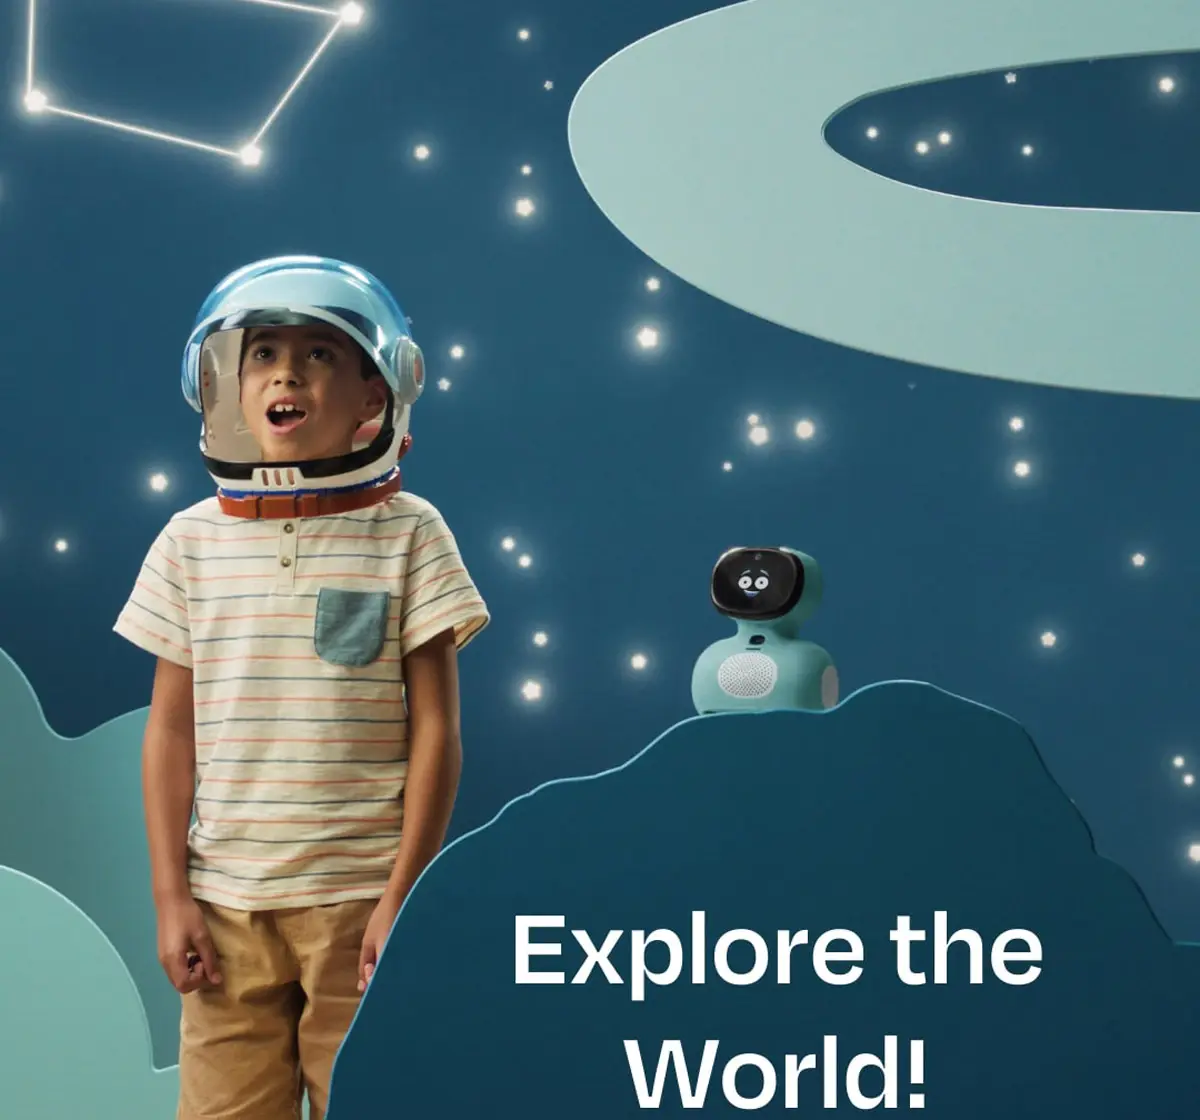 Miko Mini: AI Robot For Kids, Interactive Bot Equipped With Coding, Stories & Games, Blue, Ages 5Y+